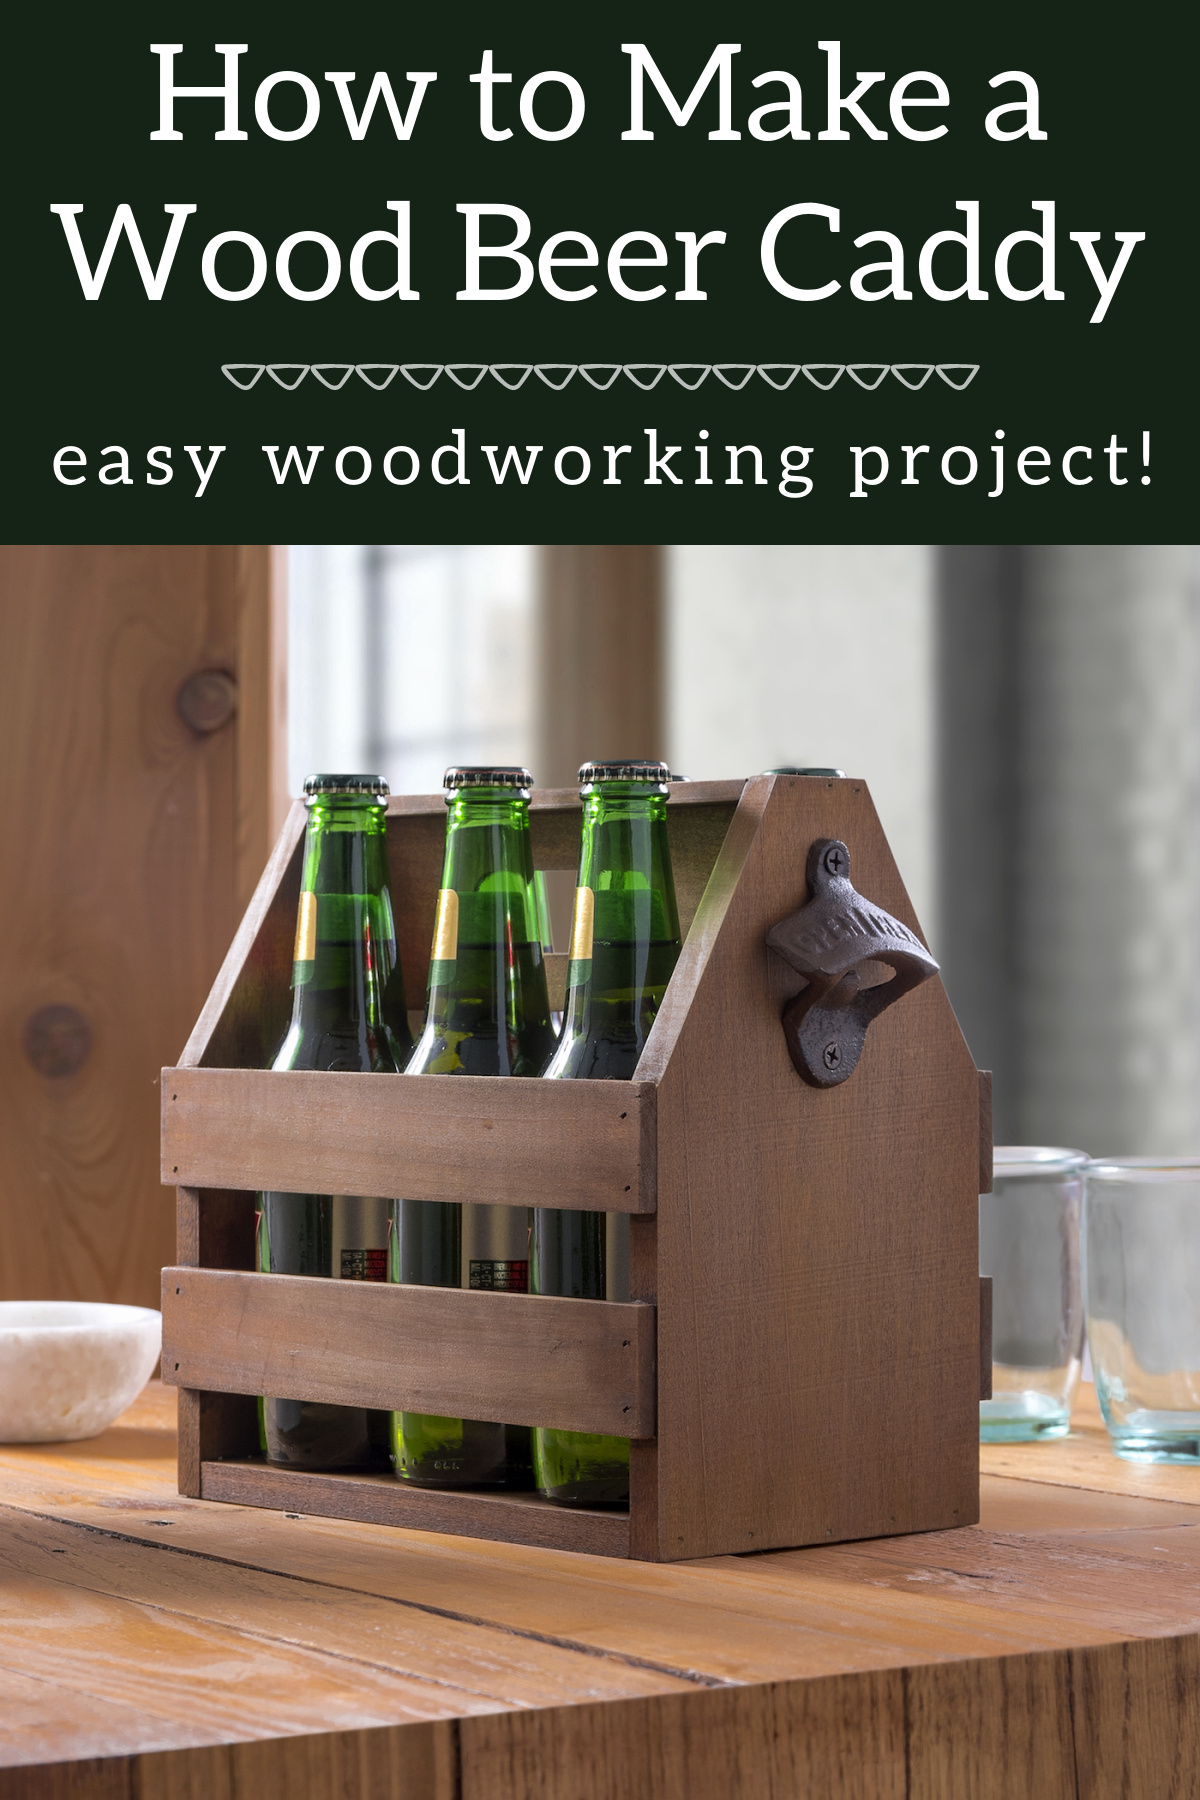 How to Make a Wood Beer Caddy